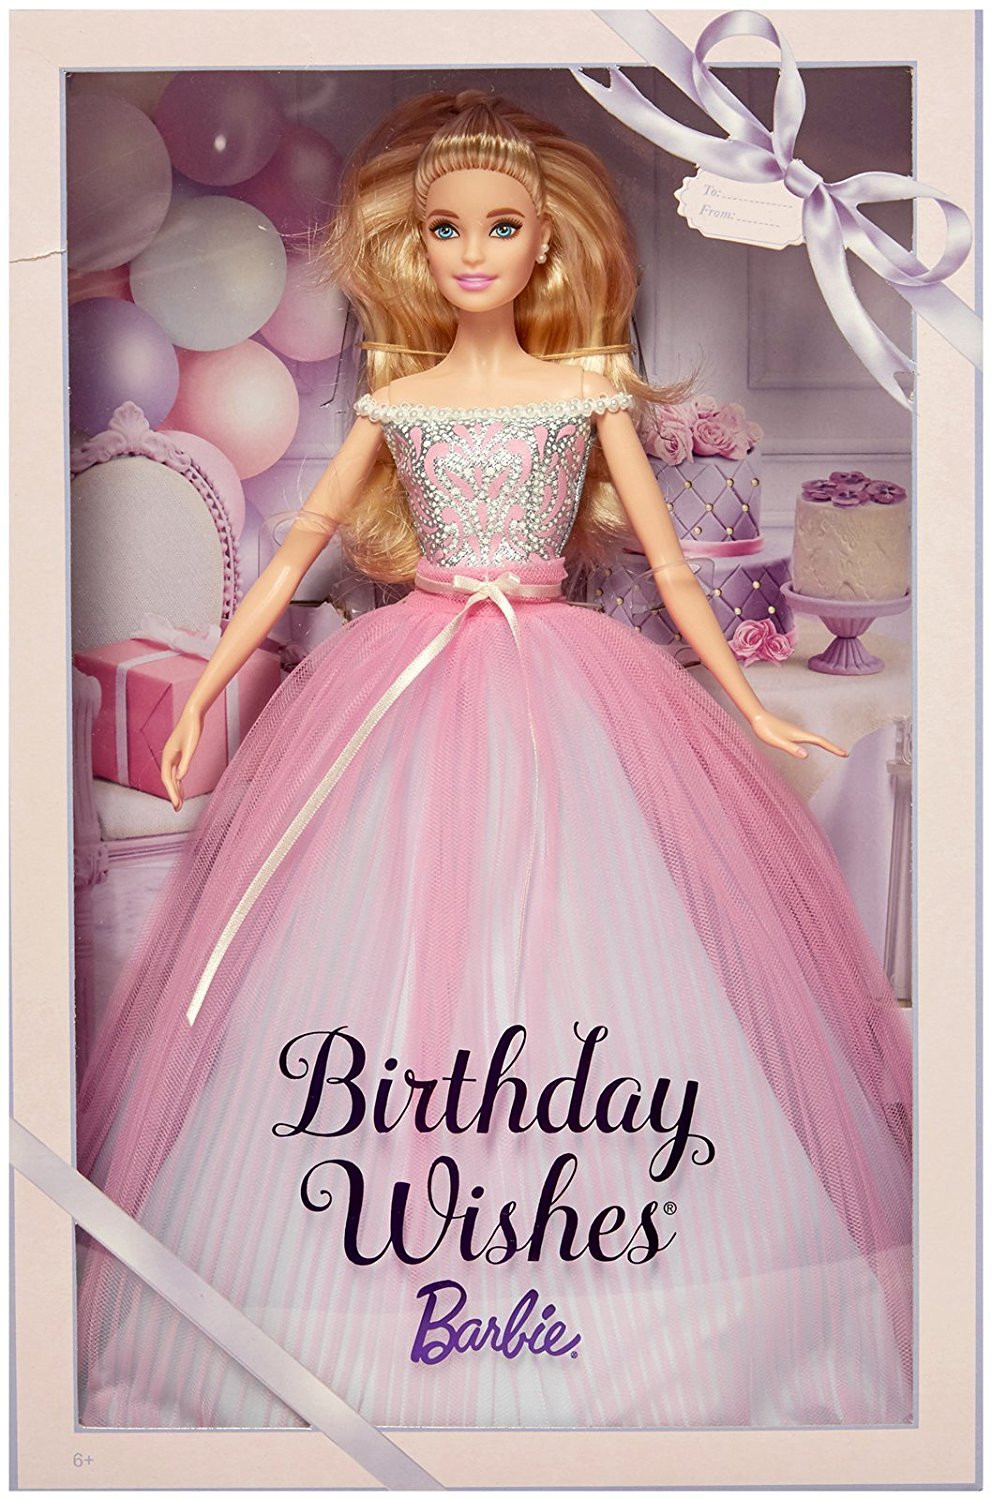 The Best Birthday Wishes Barbie – Home, Family, Style and Art Ideas